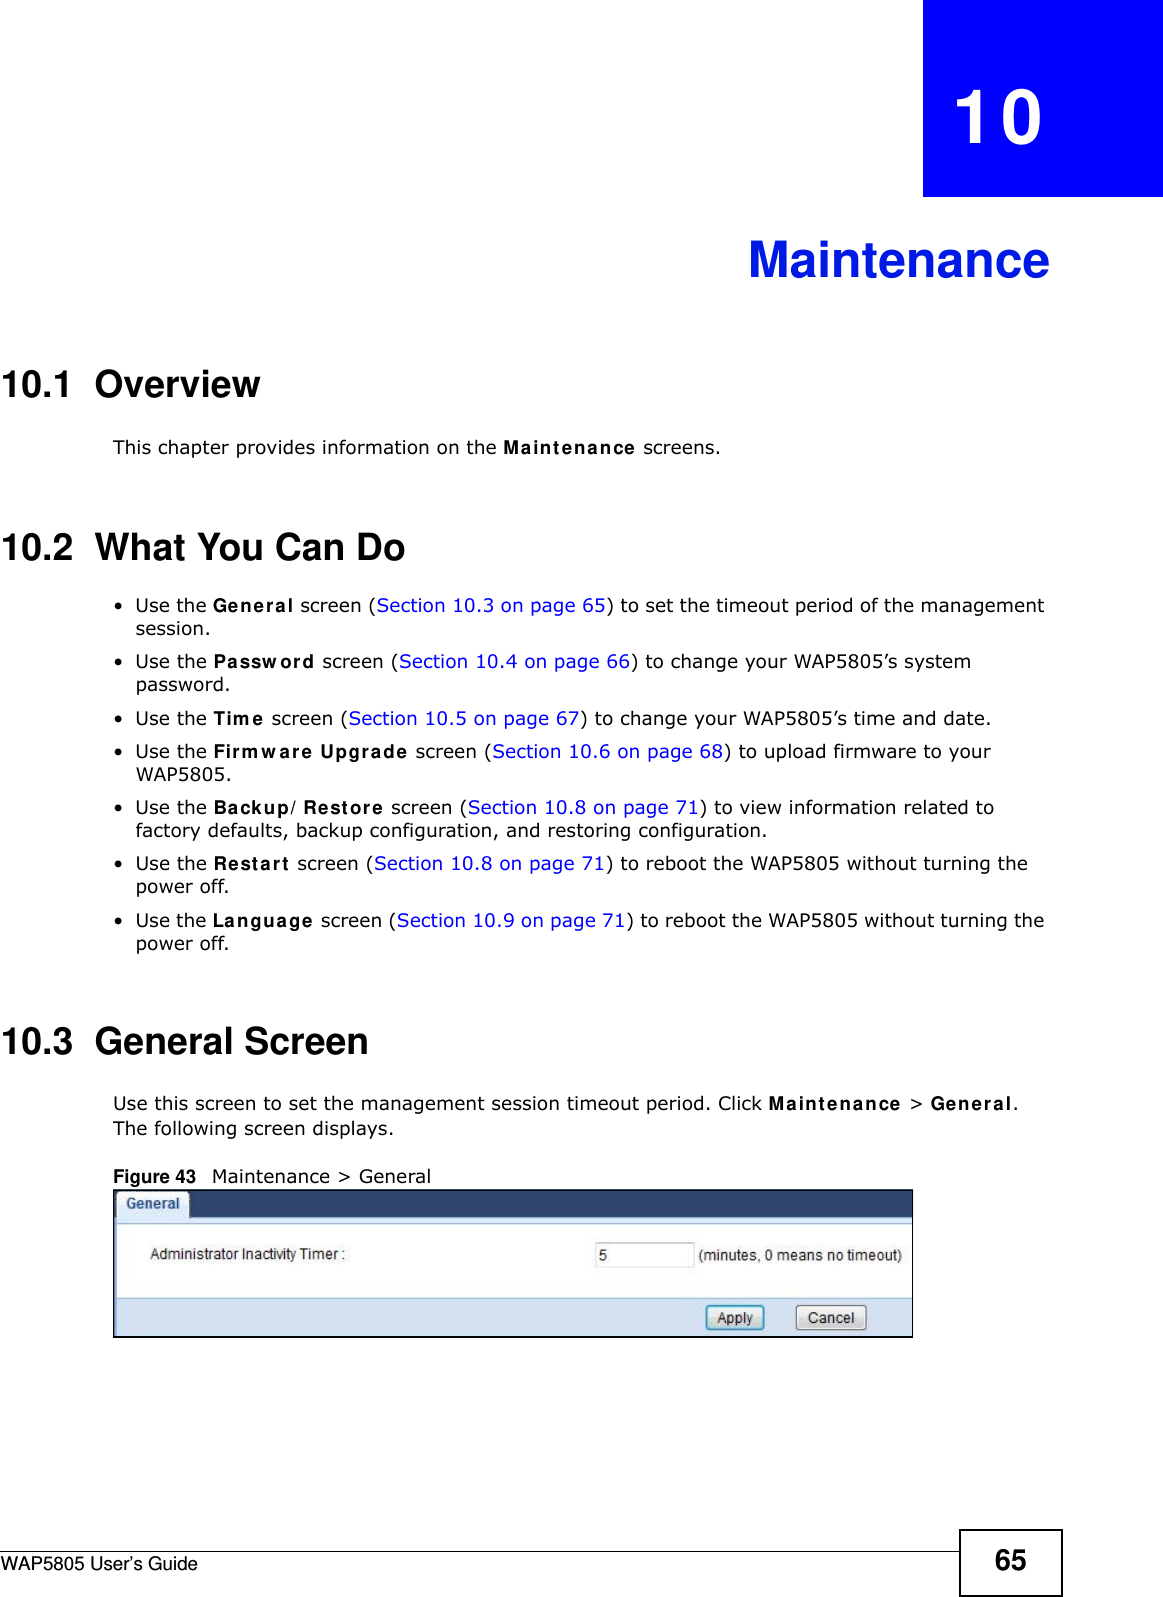 WAP5805 User’s Guide 65CHAPTER   10Maintenance10.1  OverviewThis chapter provides information on the Maintenance screens. 10.2  What You Can Do•Use the General screen (Section 10.3 on page 65) to set the timeout period of the management session. •Use the Password screen (Section 10.4 on page 66) to change your WAP5805’s system password.•Use the Time screen (Section 10.5 on page 67) to change your WAP5805’s time and date.•Use the Firmware Upgrade screen (Section 10.6 on page 68) to upload firmware to your WAP5805.•Use the Backup/Restore screen (Section 10.8 on page 71) to view information related to factory defaults, backup configuration, and restoring configuration.•Use the Restart screen (Section 10.8 on page 71) to reboot the WAP5805 without turning the power off.•Use the Language screen (Section 10.9 on page 71) to reboot the WAP5805 without turning the power off.10.3  General Screen    Use this screen to set the management session timeout period. Click Maintenance &gt; General. The following screen displays.Figure 43   Maintenance &gt; General 